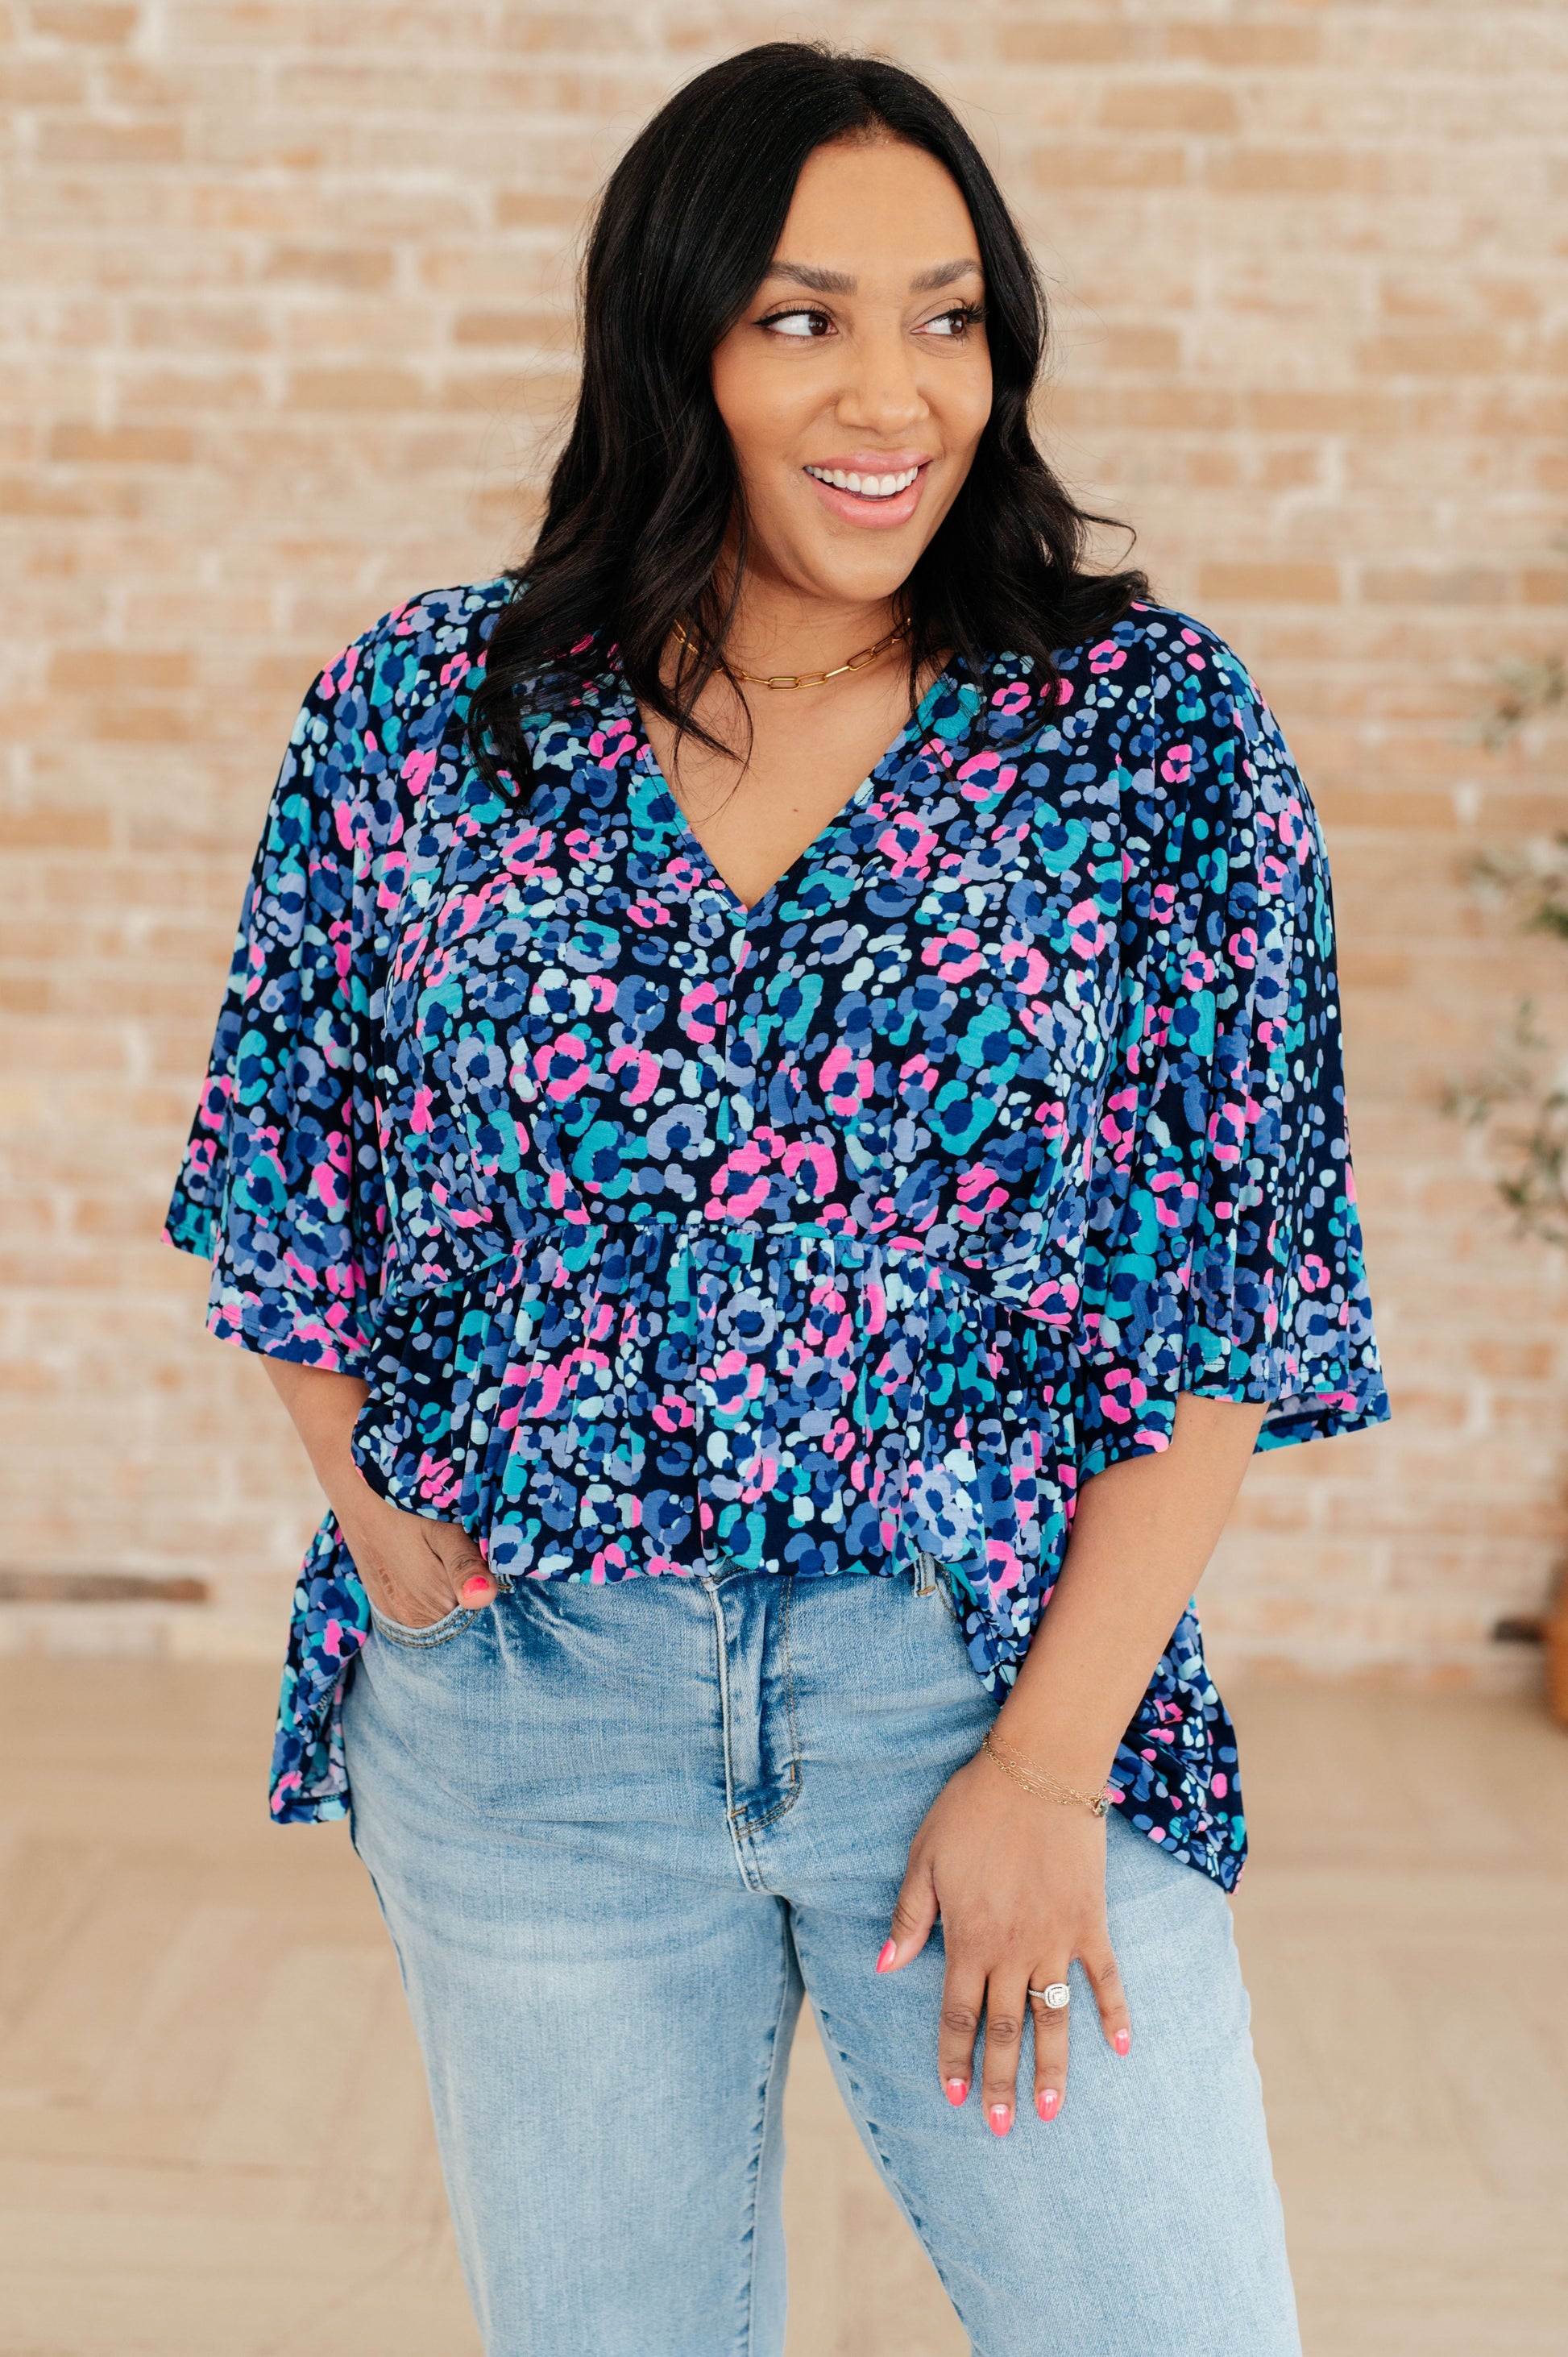 Dreamer Peplum Top in Navy and Lavender Animal Print - Southern Divas Boutique